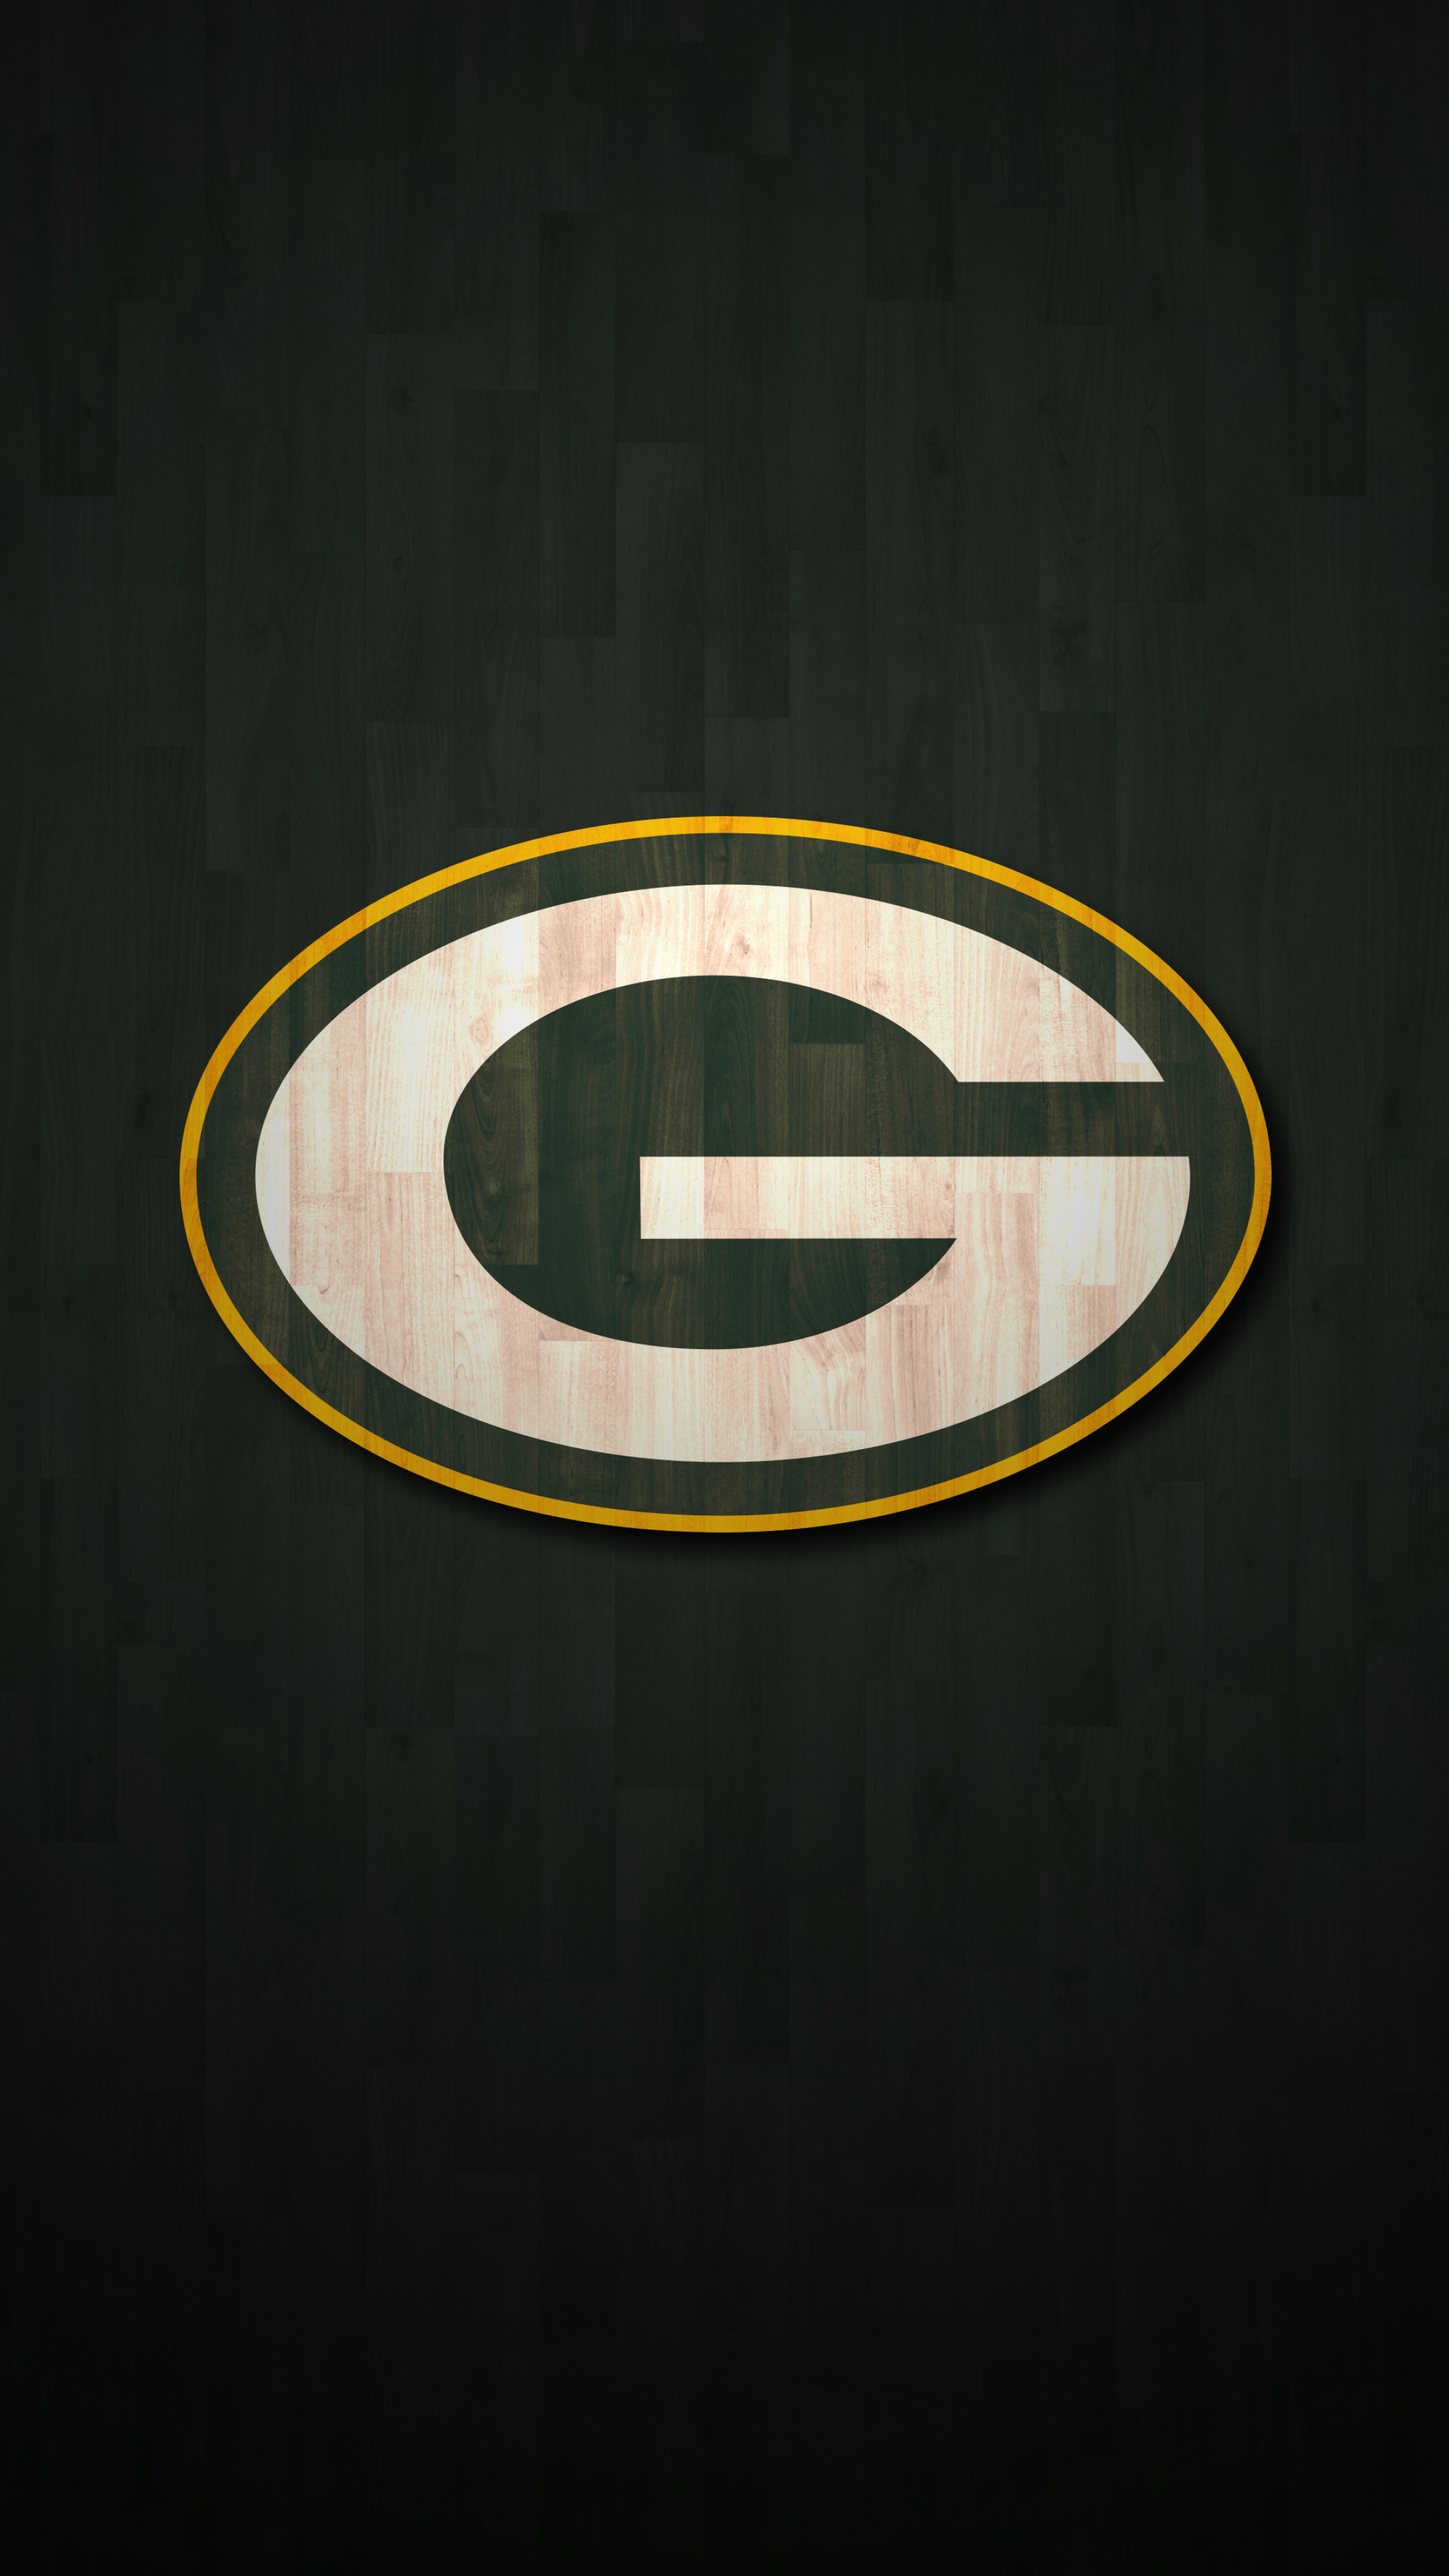 Green Bay Packers: A professional American football team based in Wisconsin. 2160x3840 4K Wallpaper.